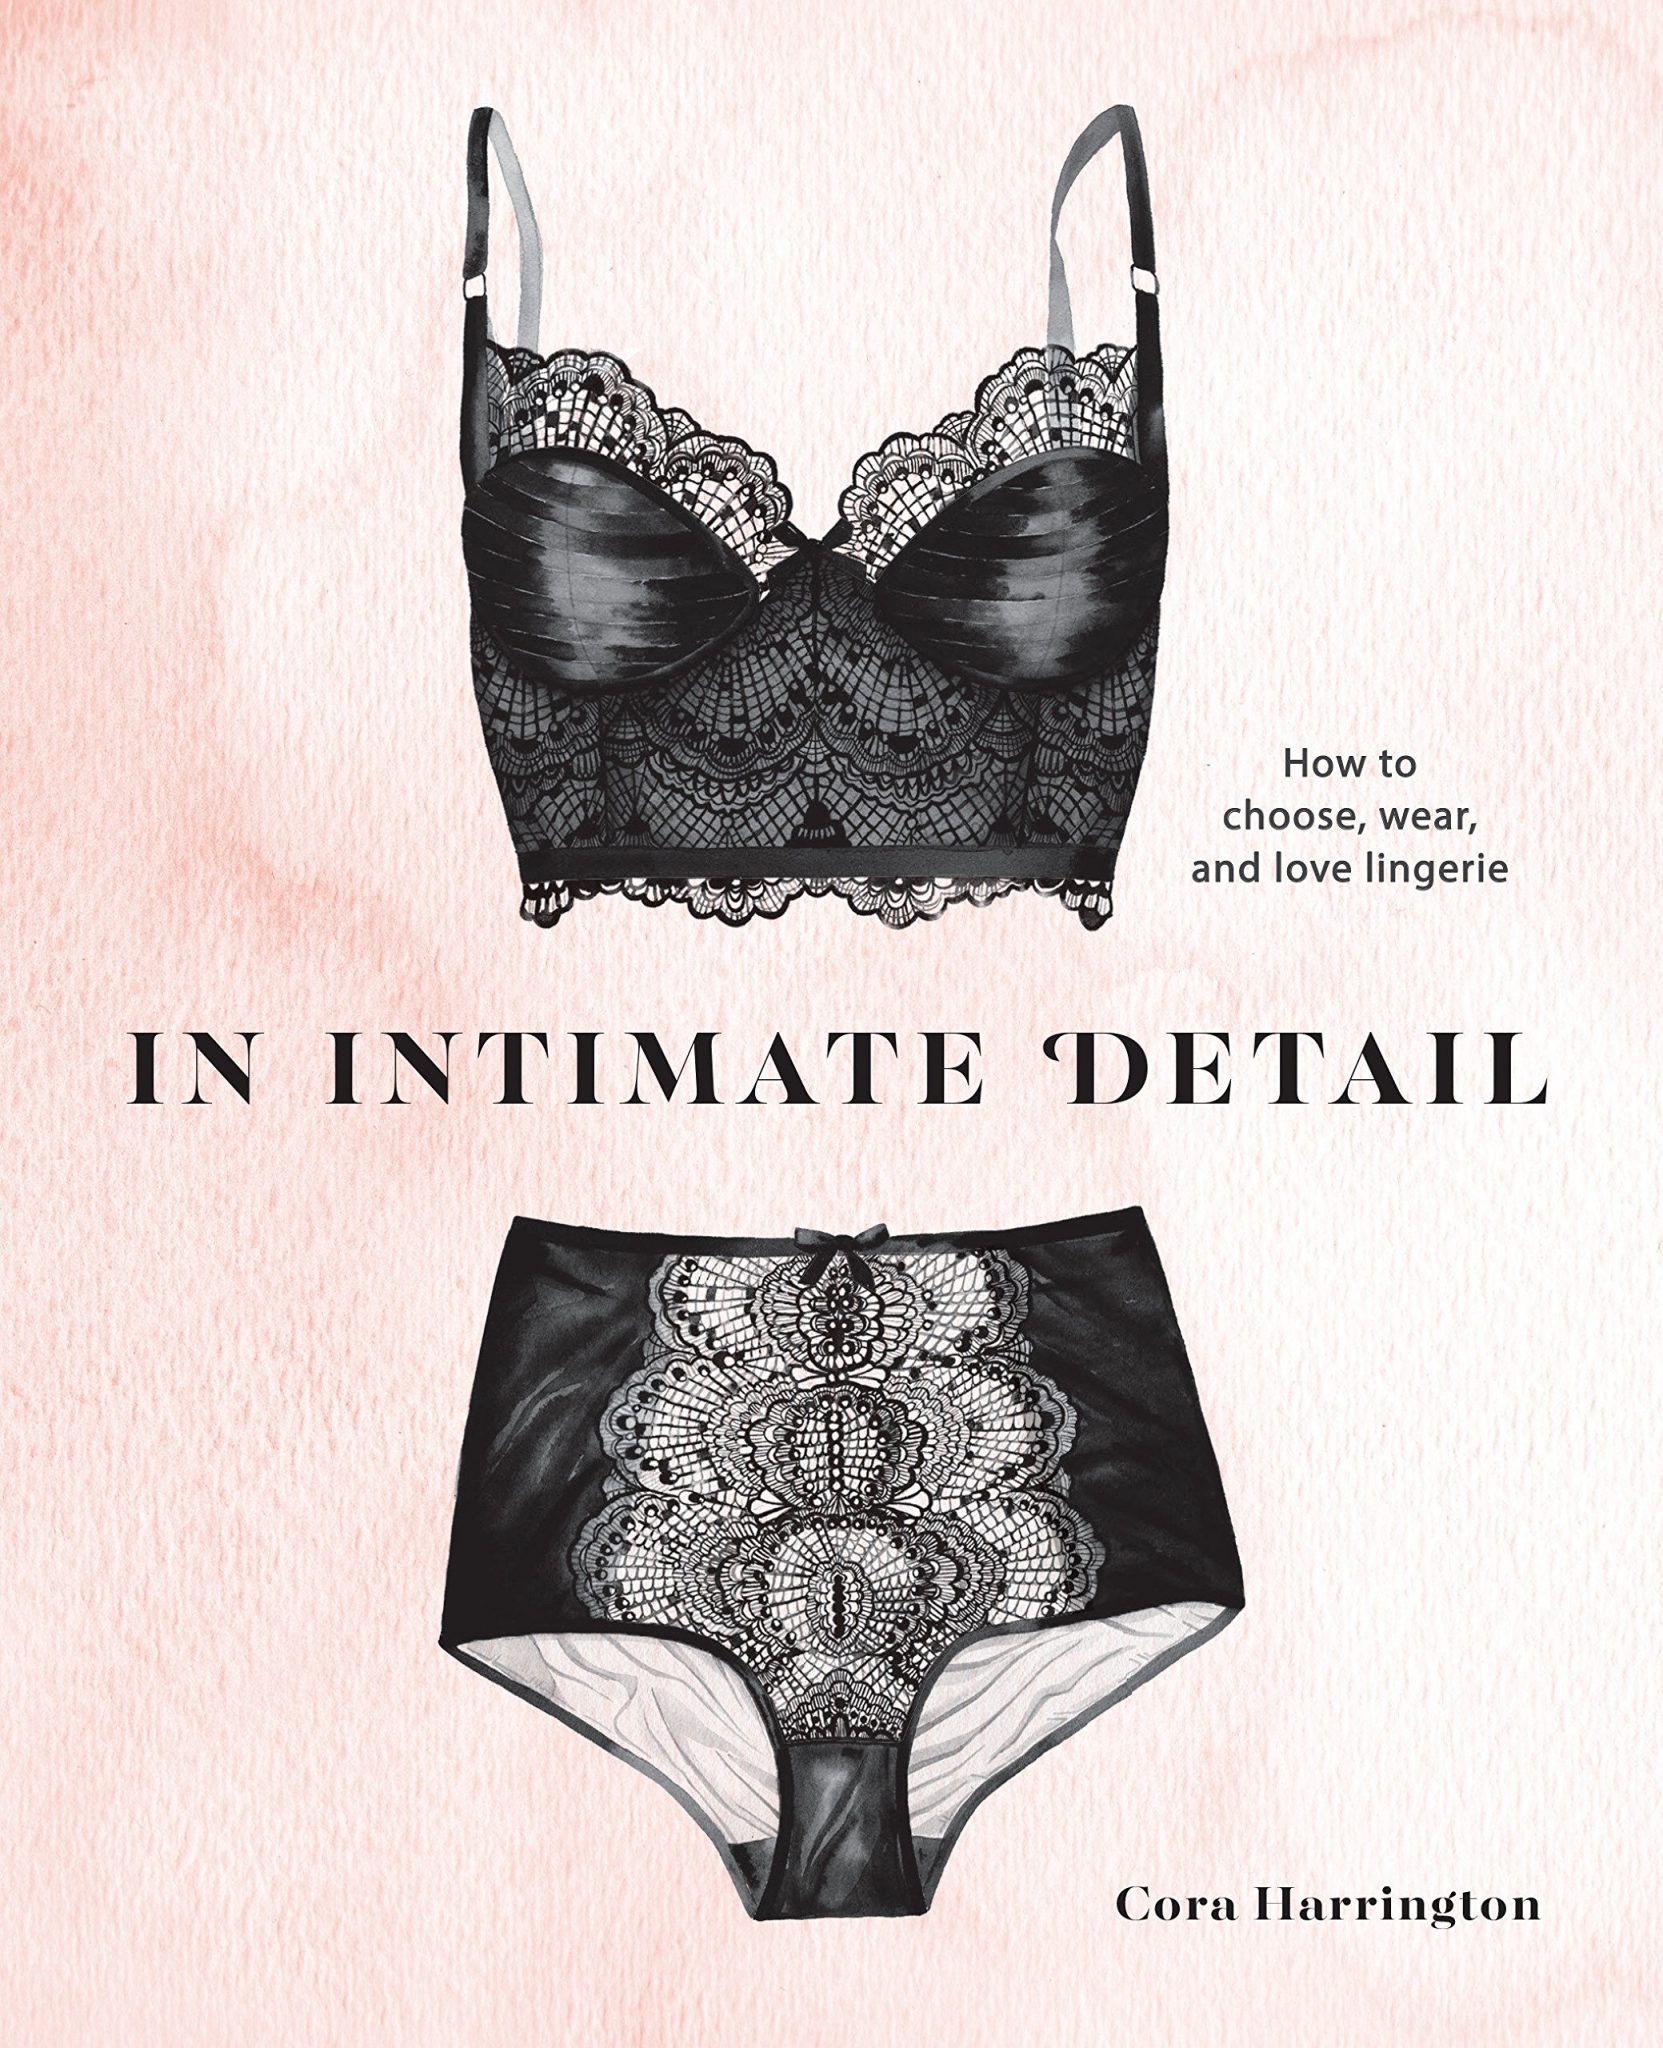 In Intimate Detail by Cora Harrington